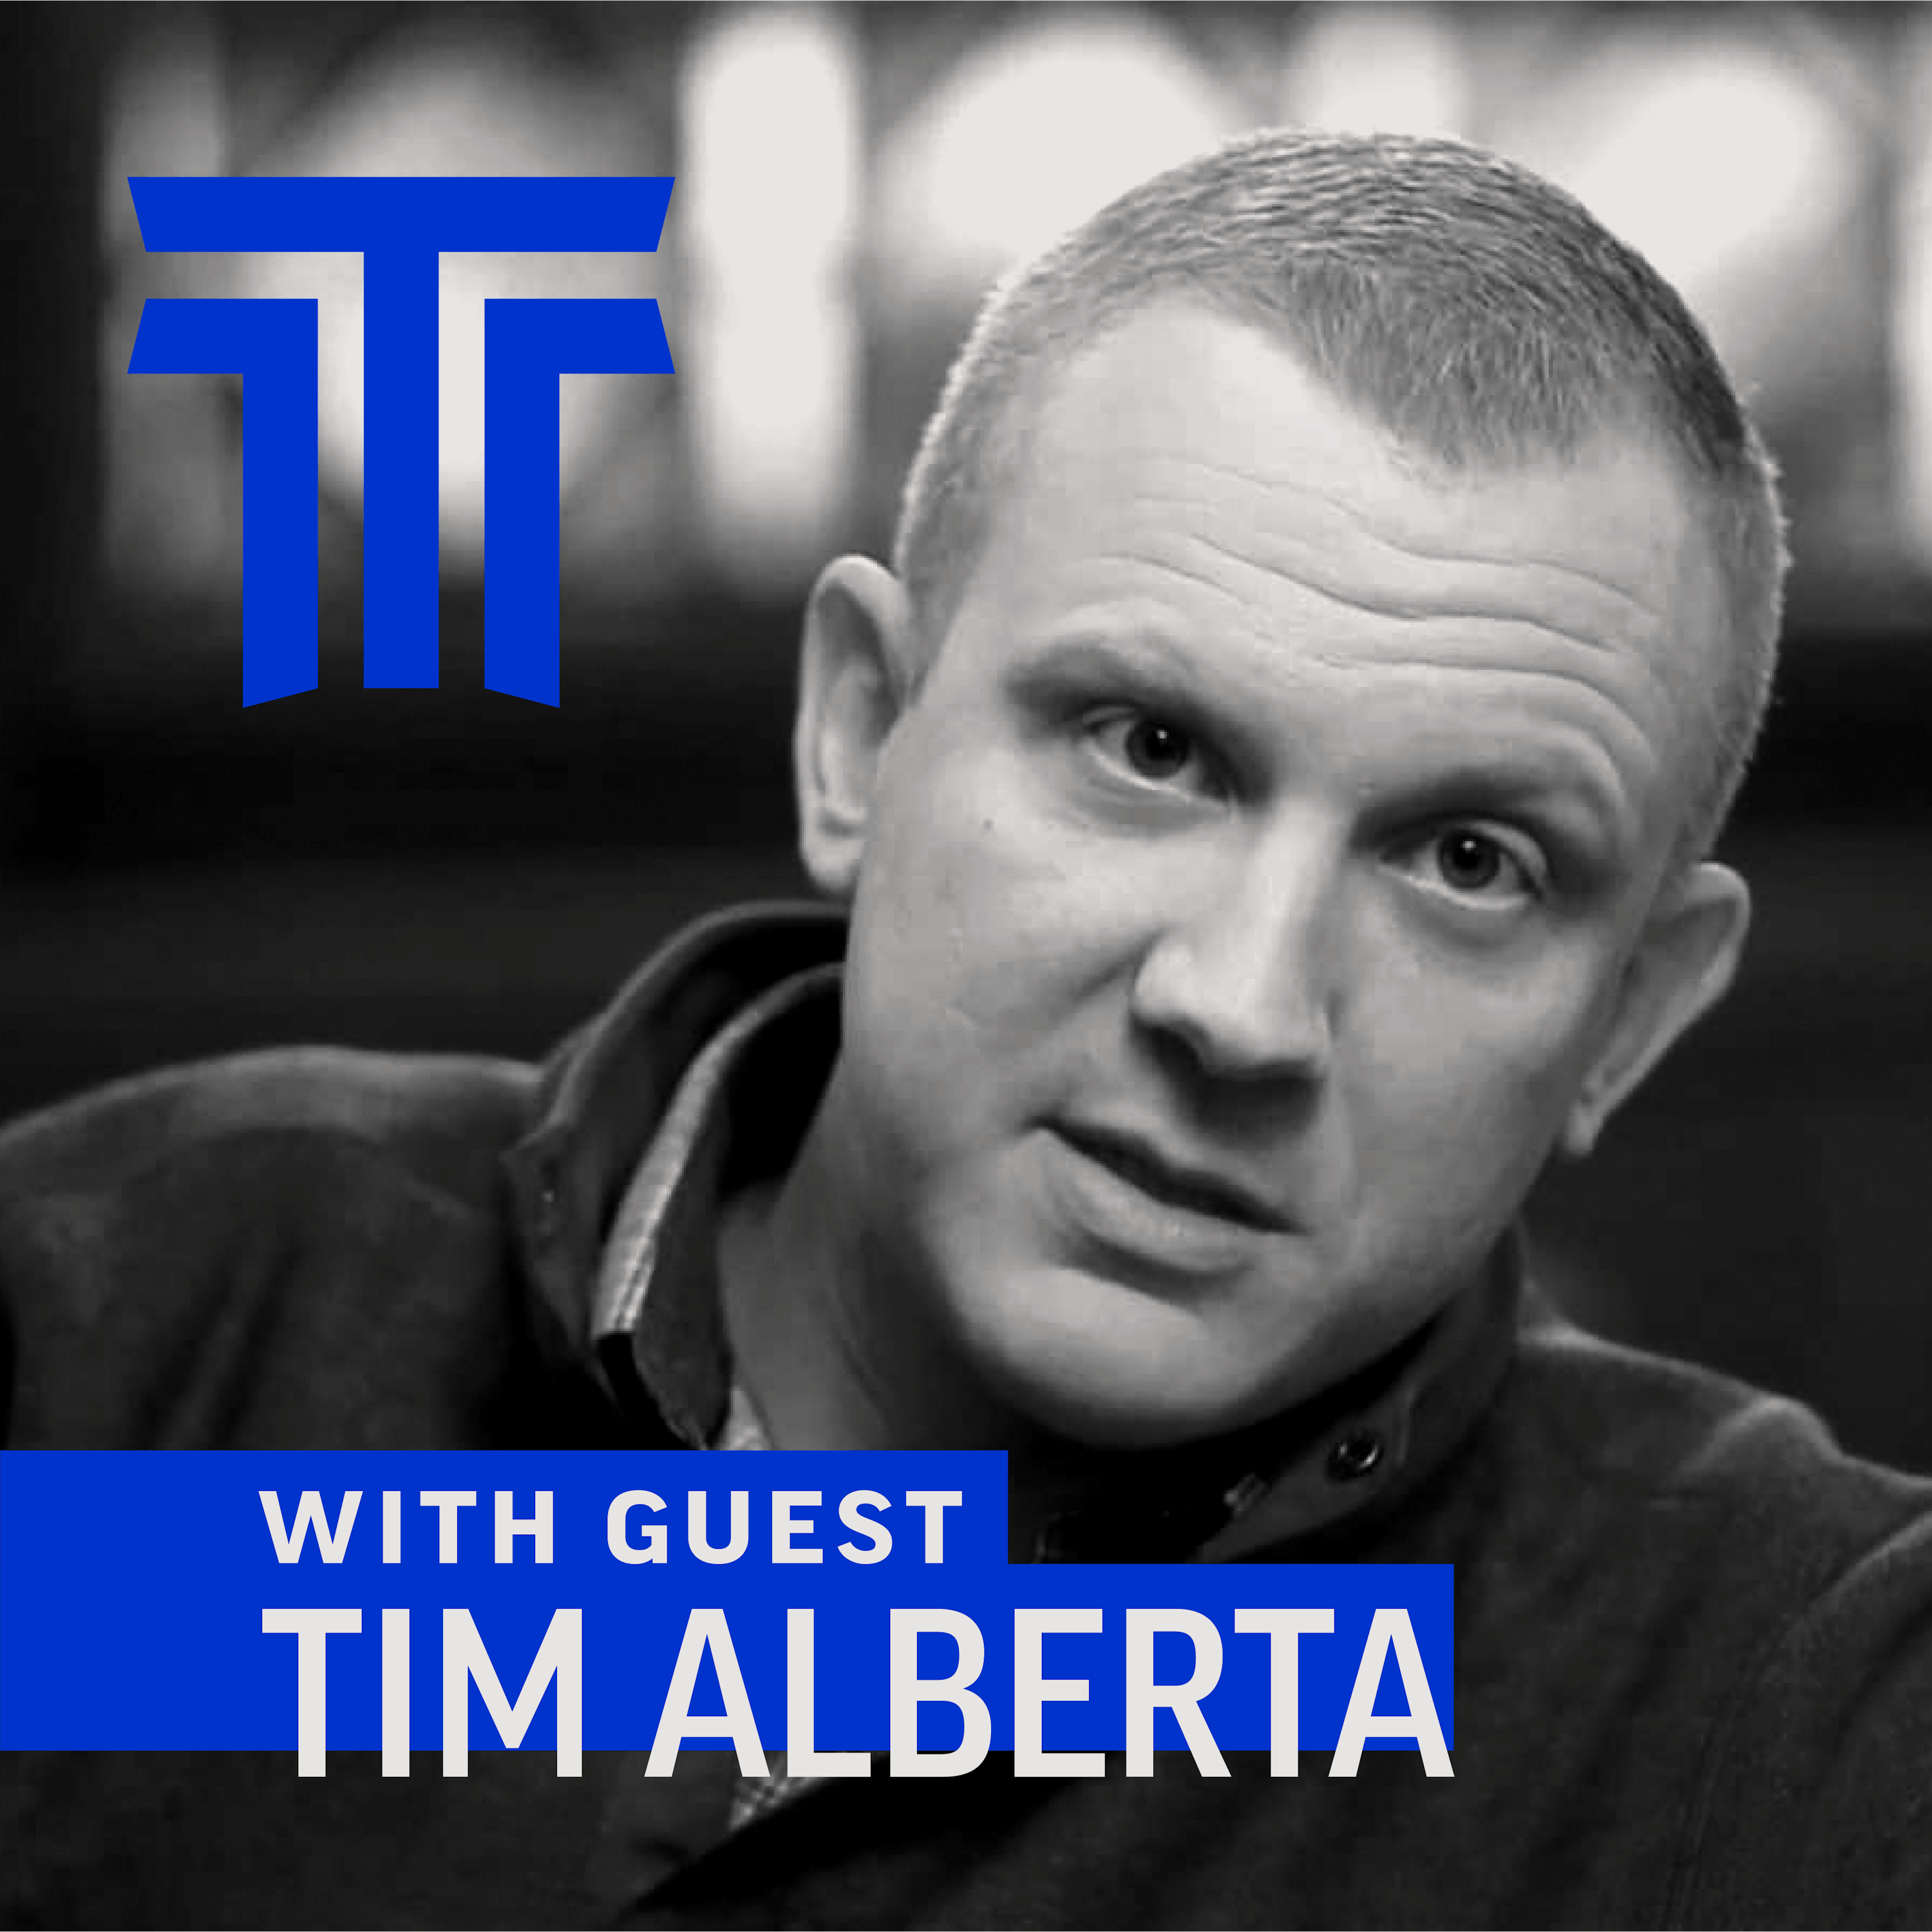 Have American Evangelicals Lost Their Purpose? with Tim Alberta